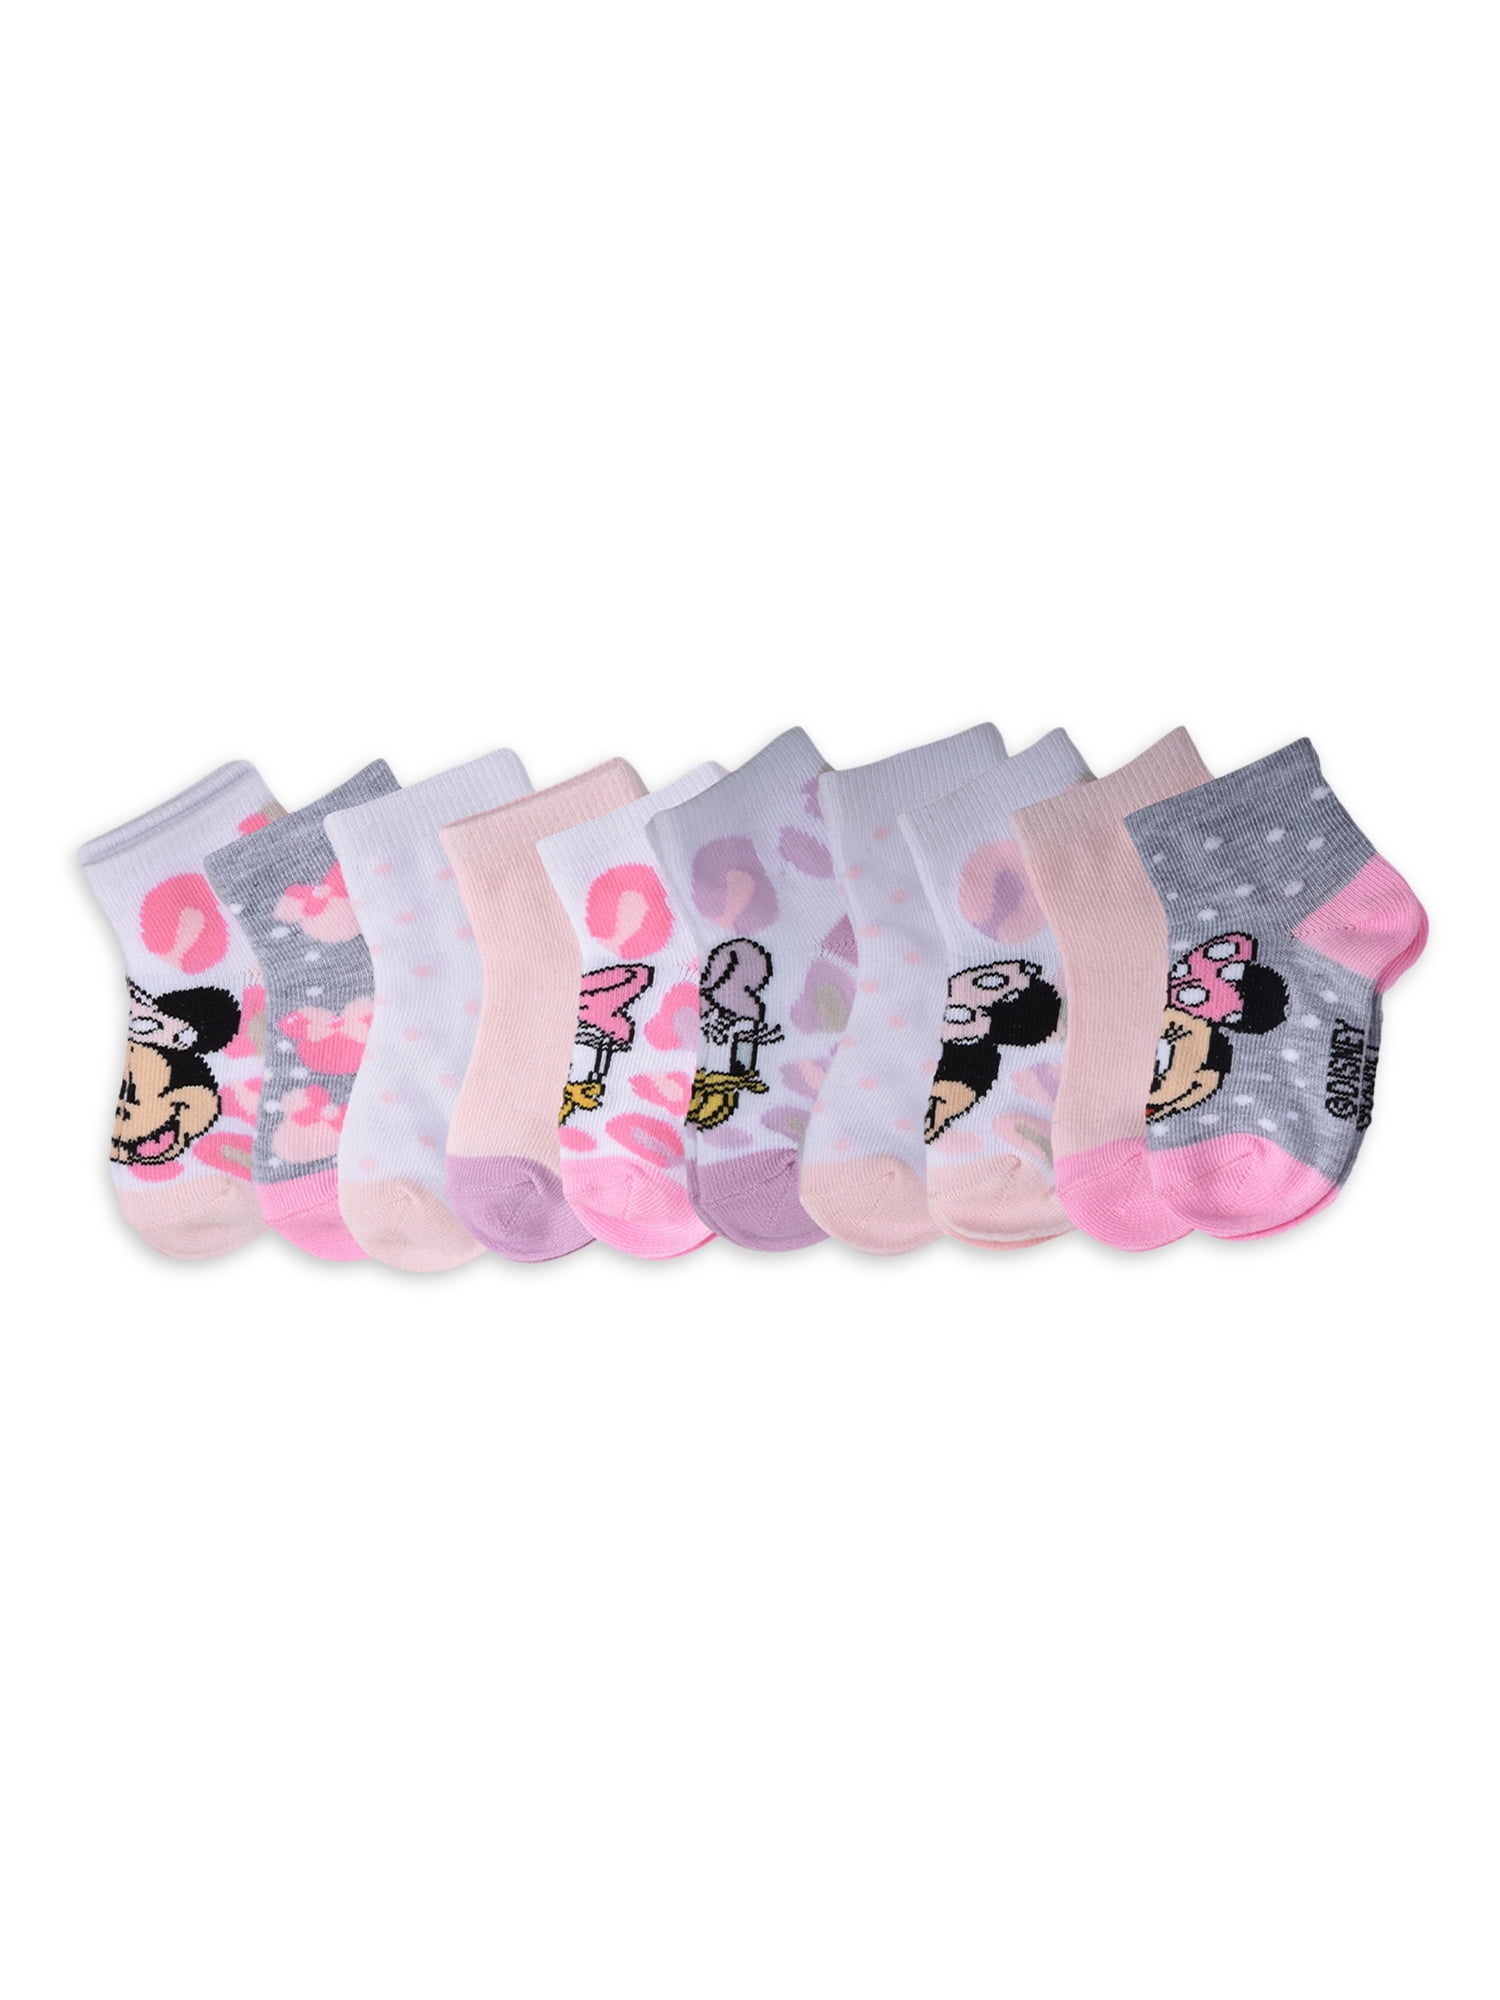 Minnie Mouse Toddler Girls Socks, 10-Pack, Sizes 12 Months - 5T